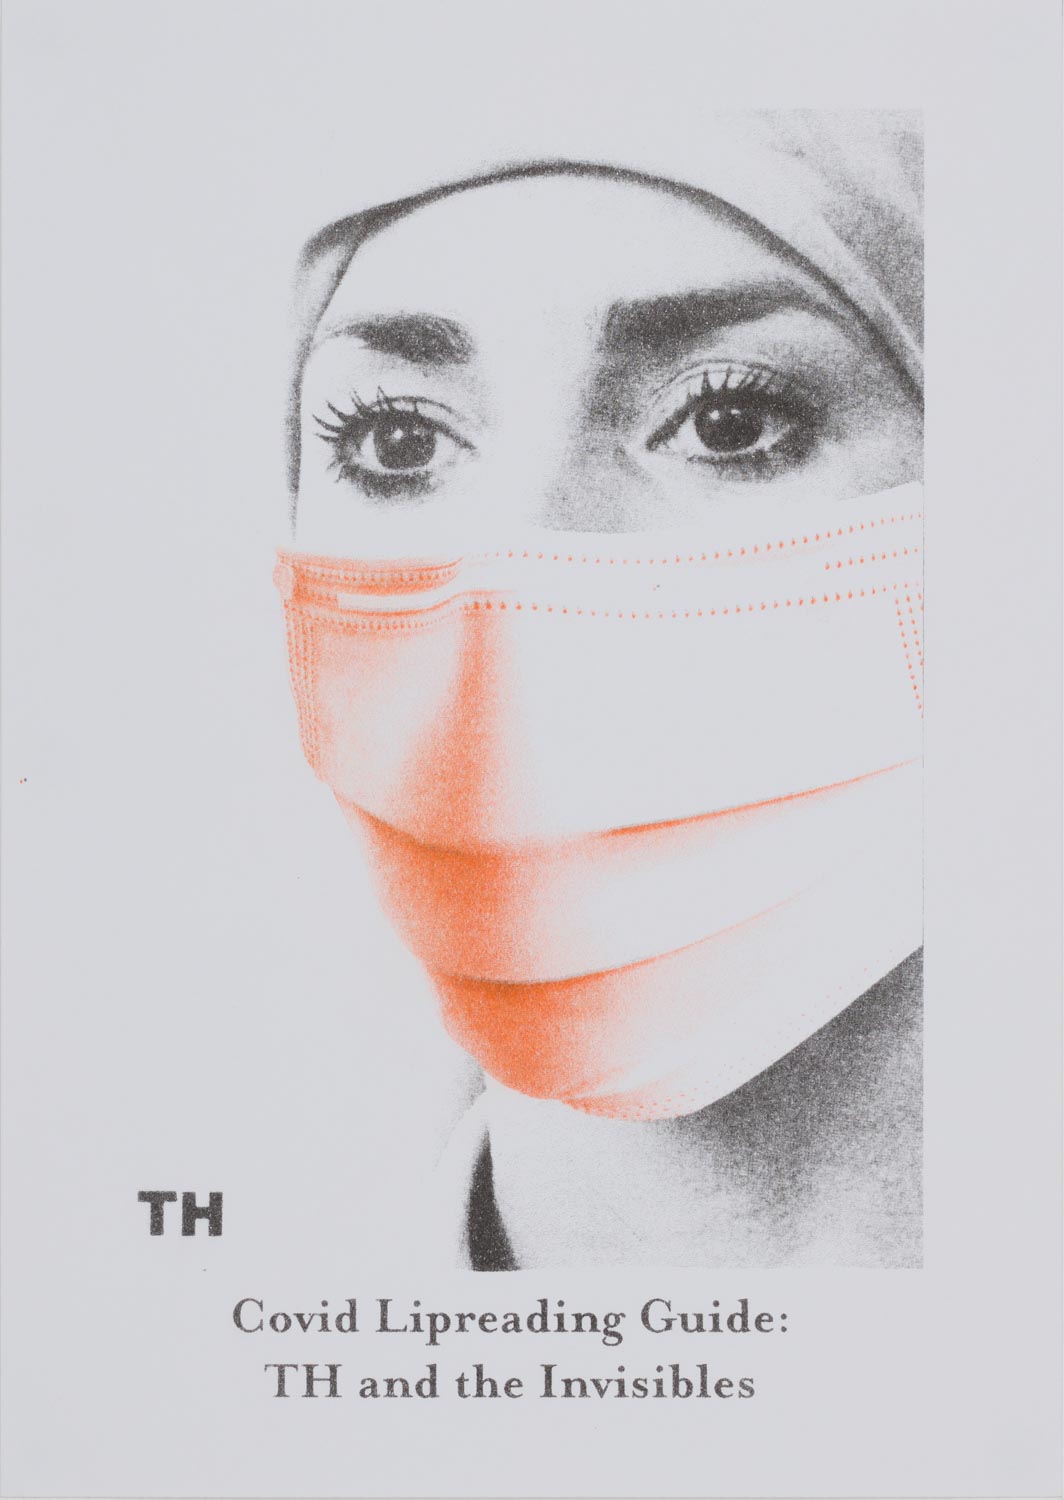 Black and white portrait of a woman’s face, her nose and mouth covered by a mask printed in orange, with black text below.